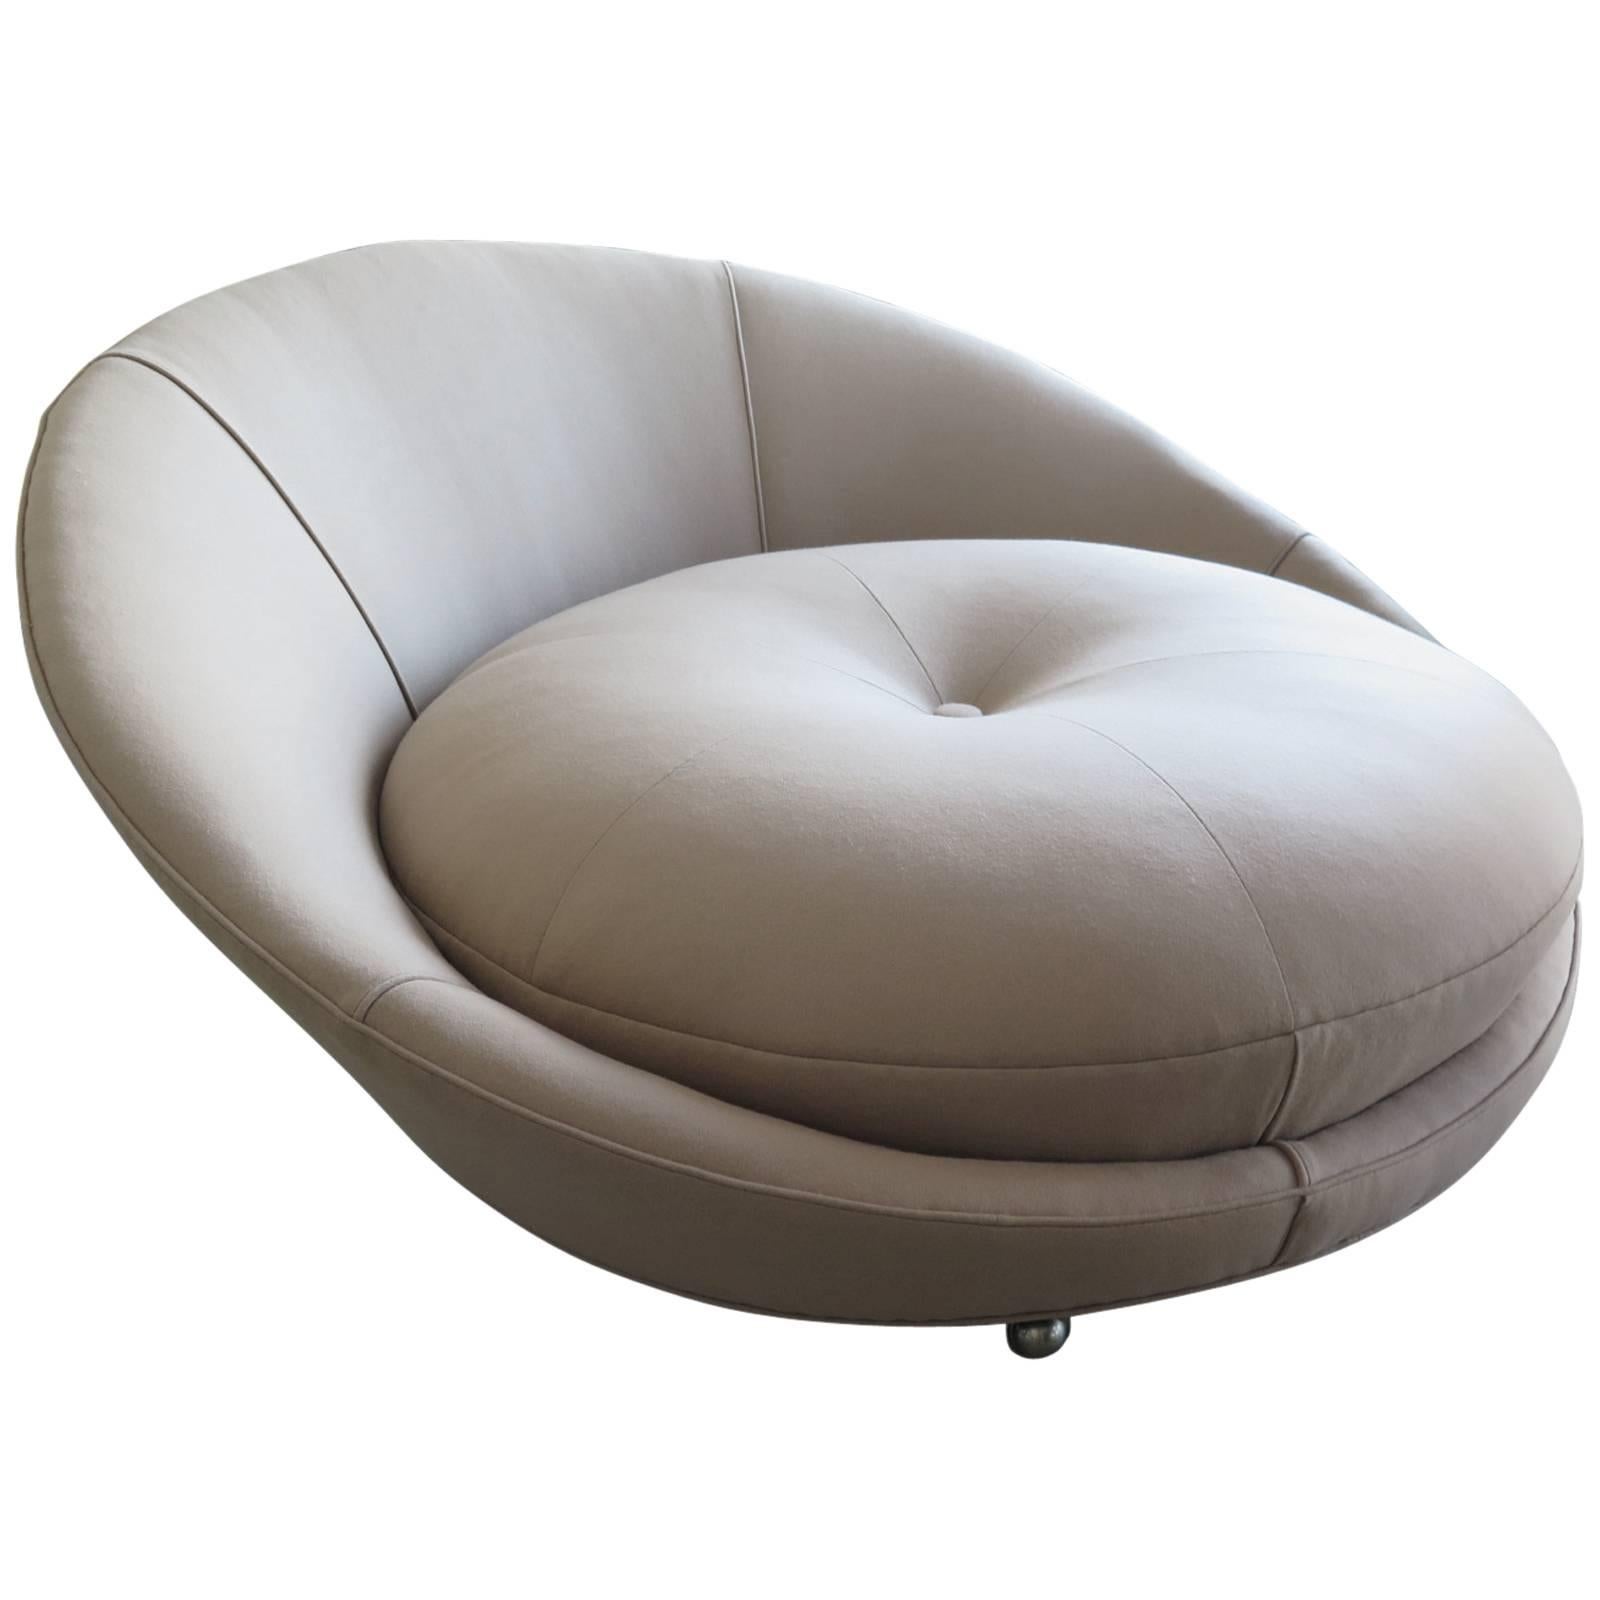 Large Round Lounge Chair by Milo Baughman